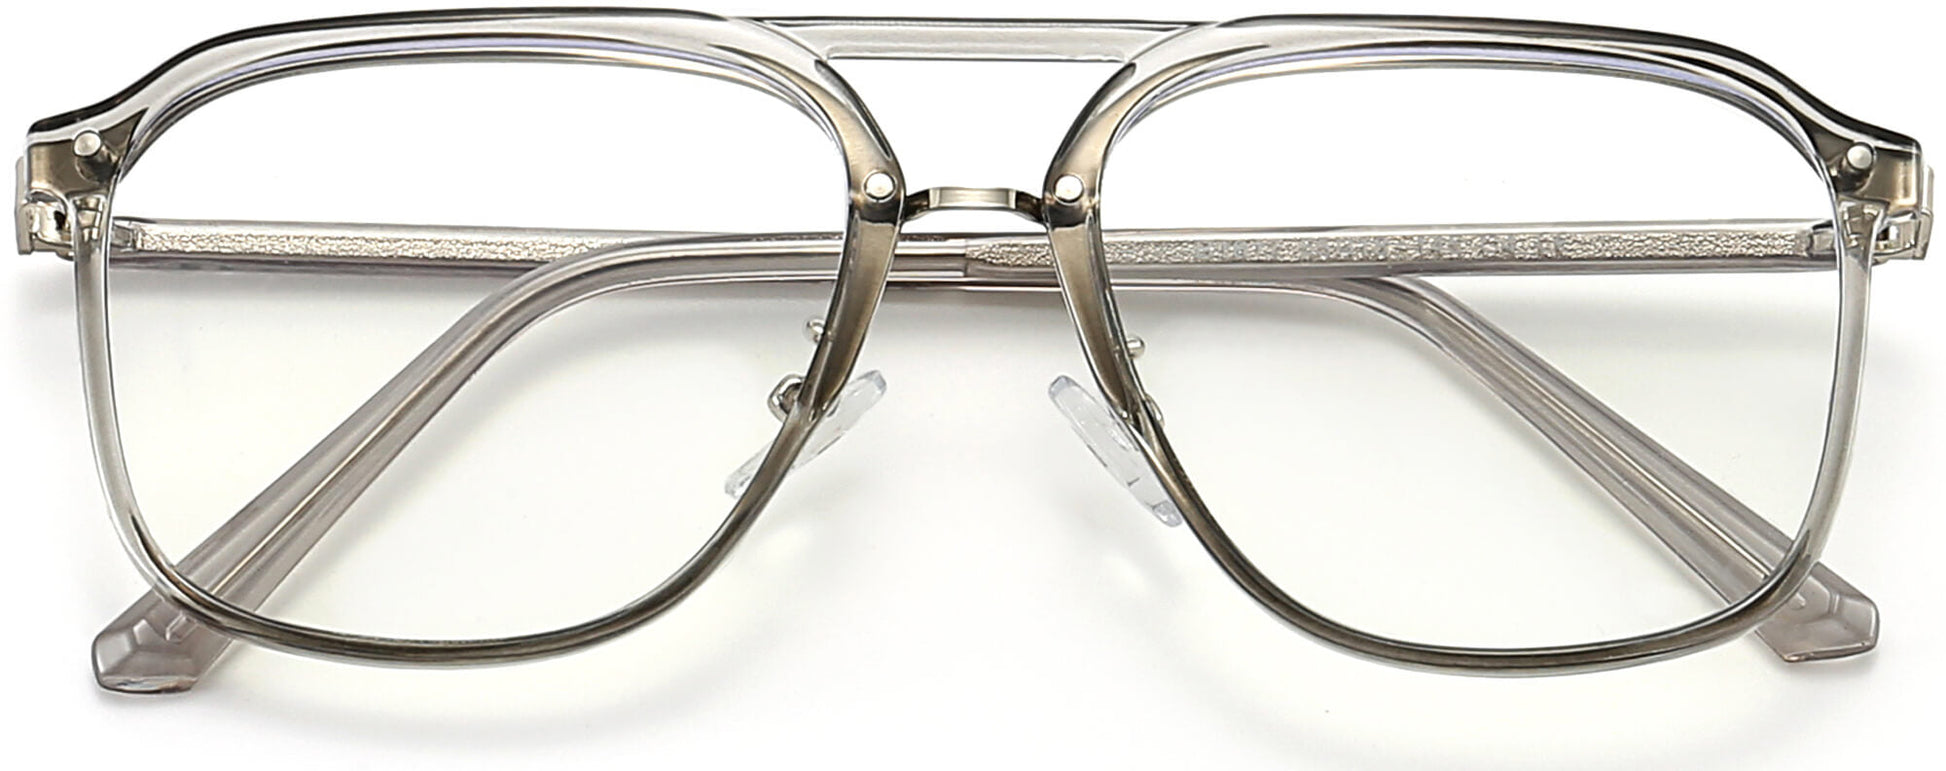 Donovan Square Gray Eyeglasses from ANRRI, closed view